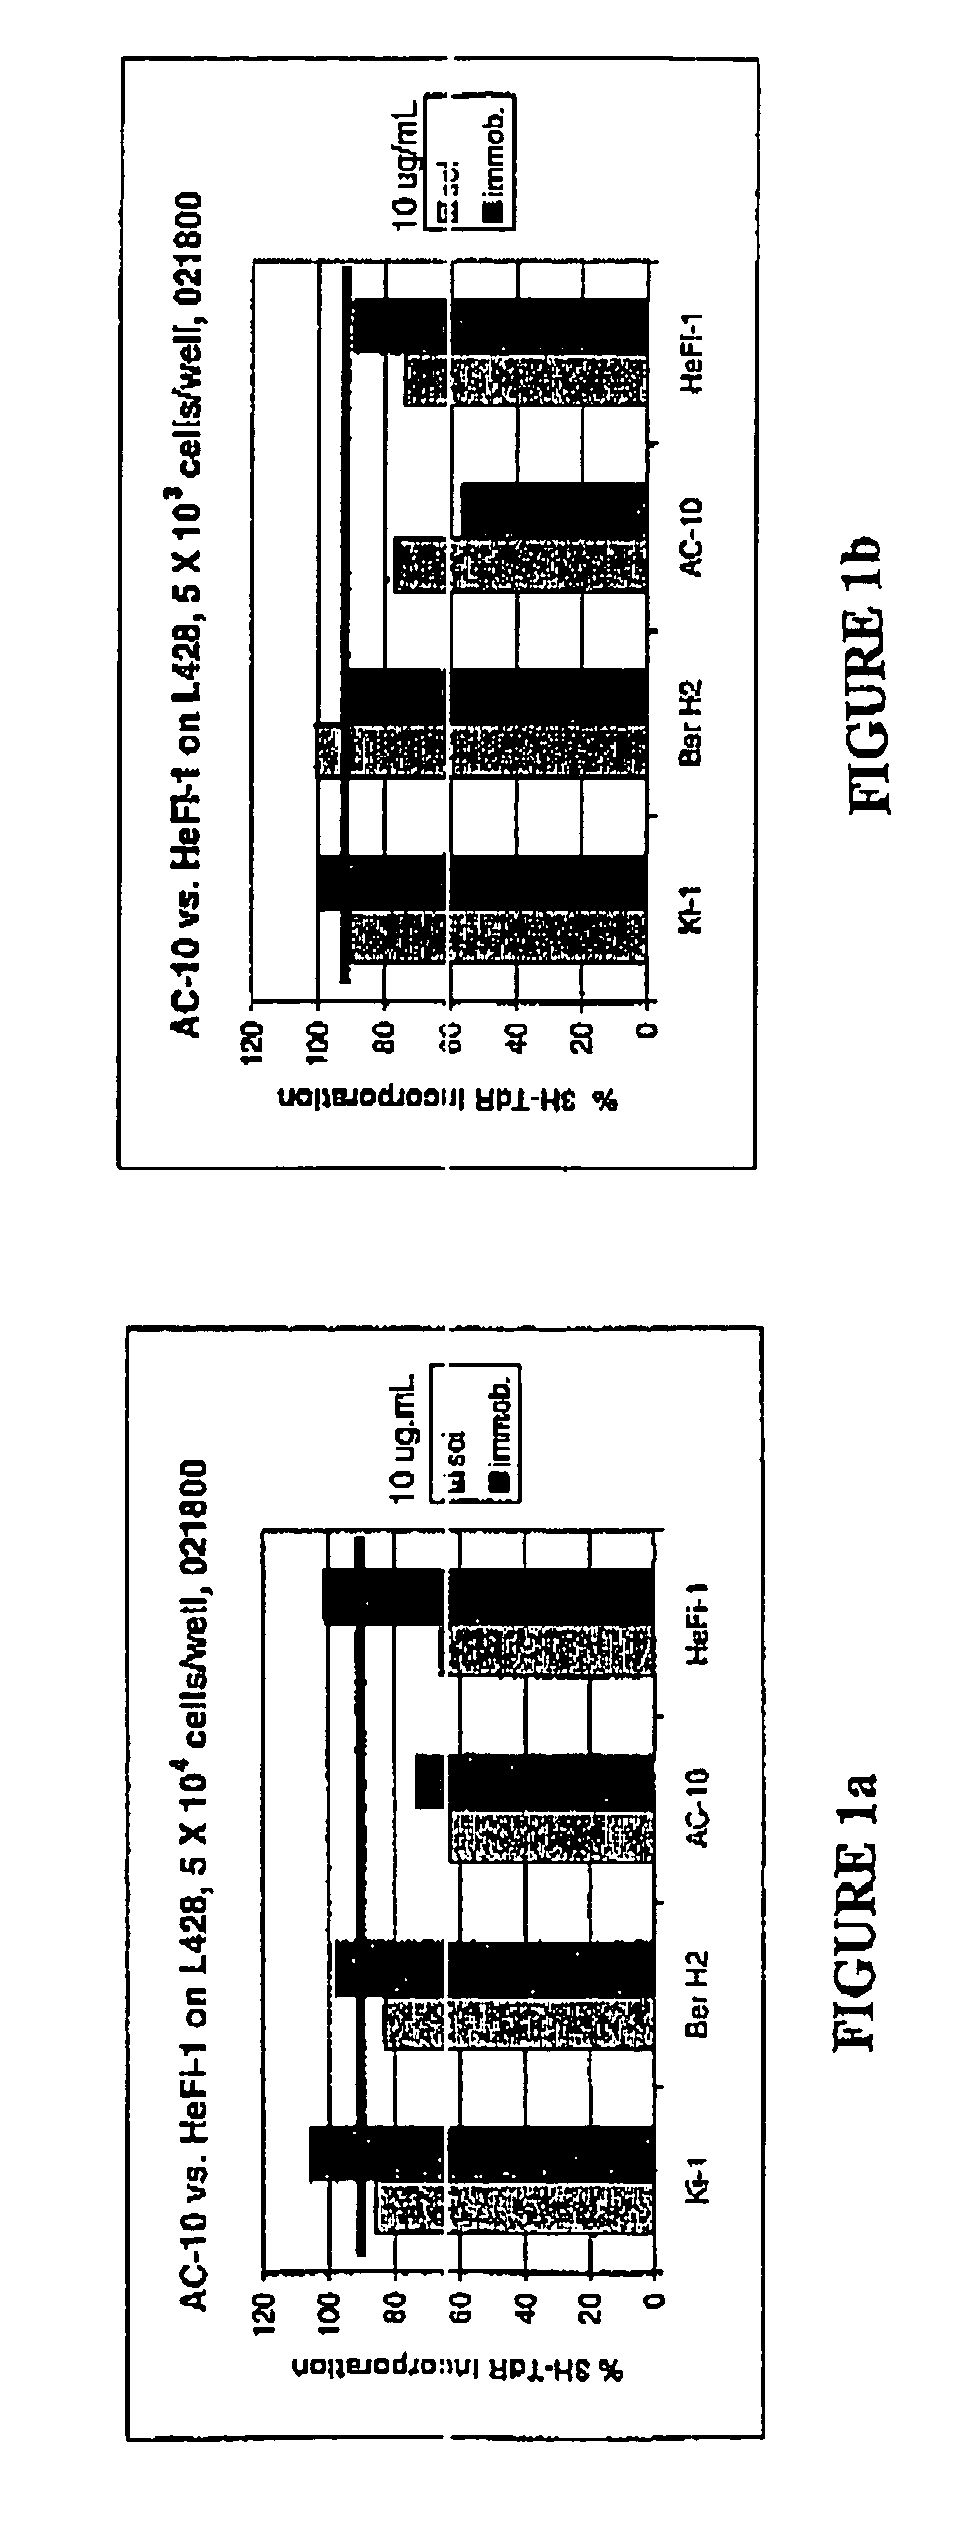 Recombinant anti-CD30 antibodies and uses thereof